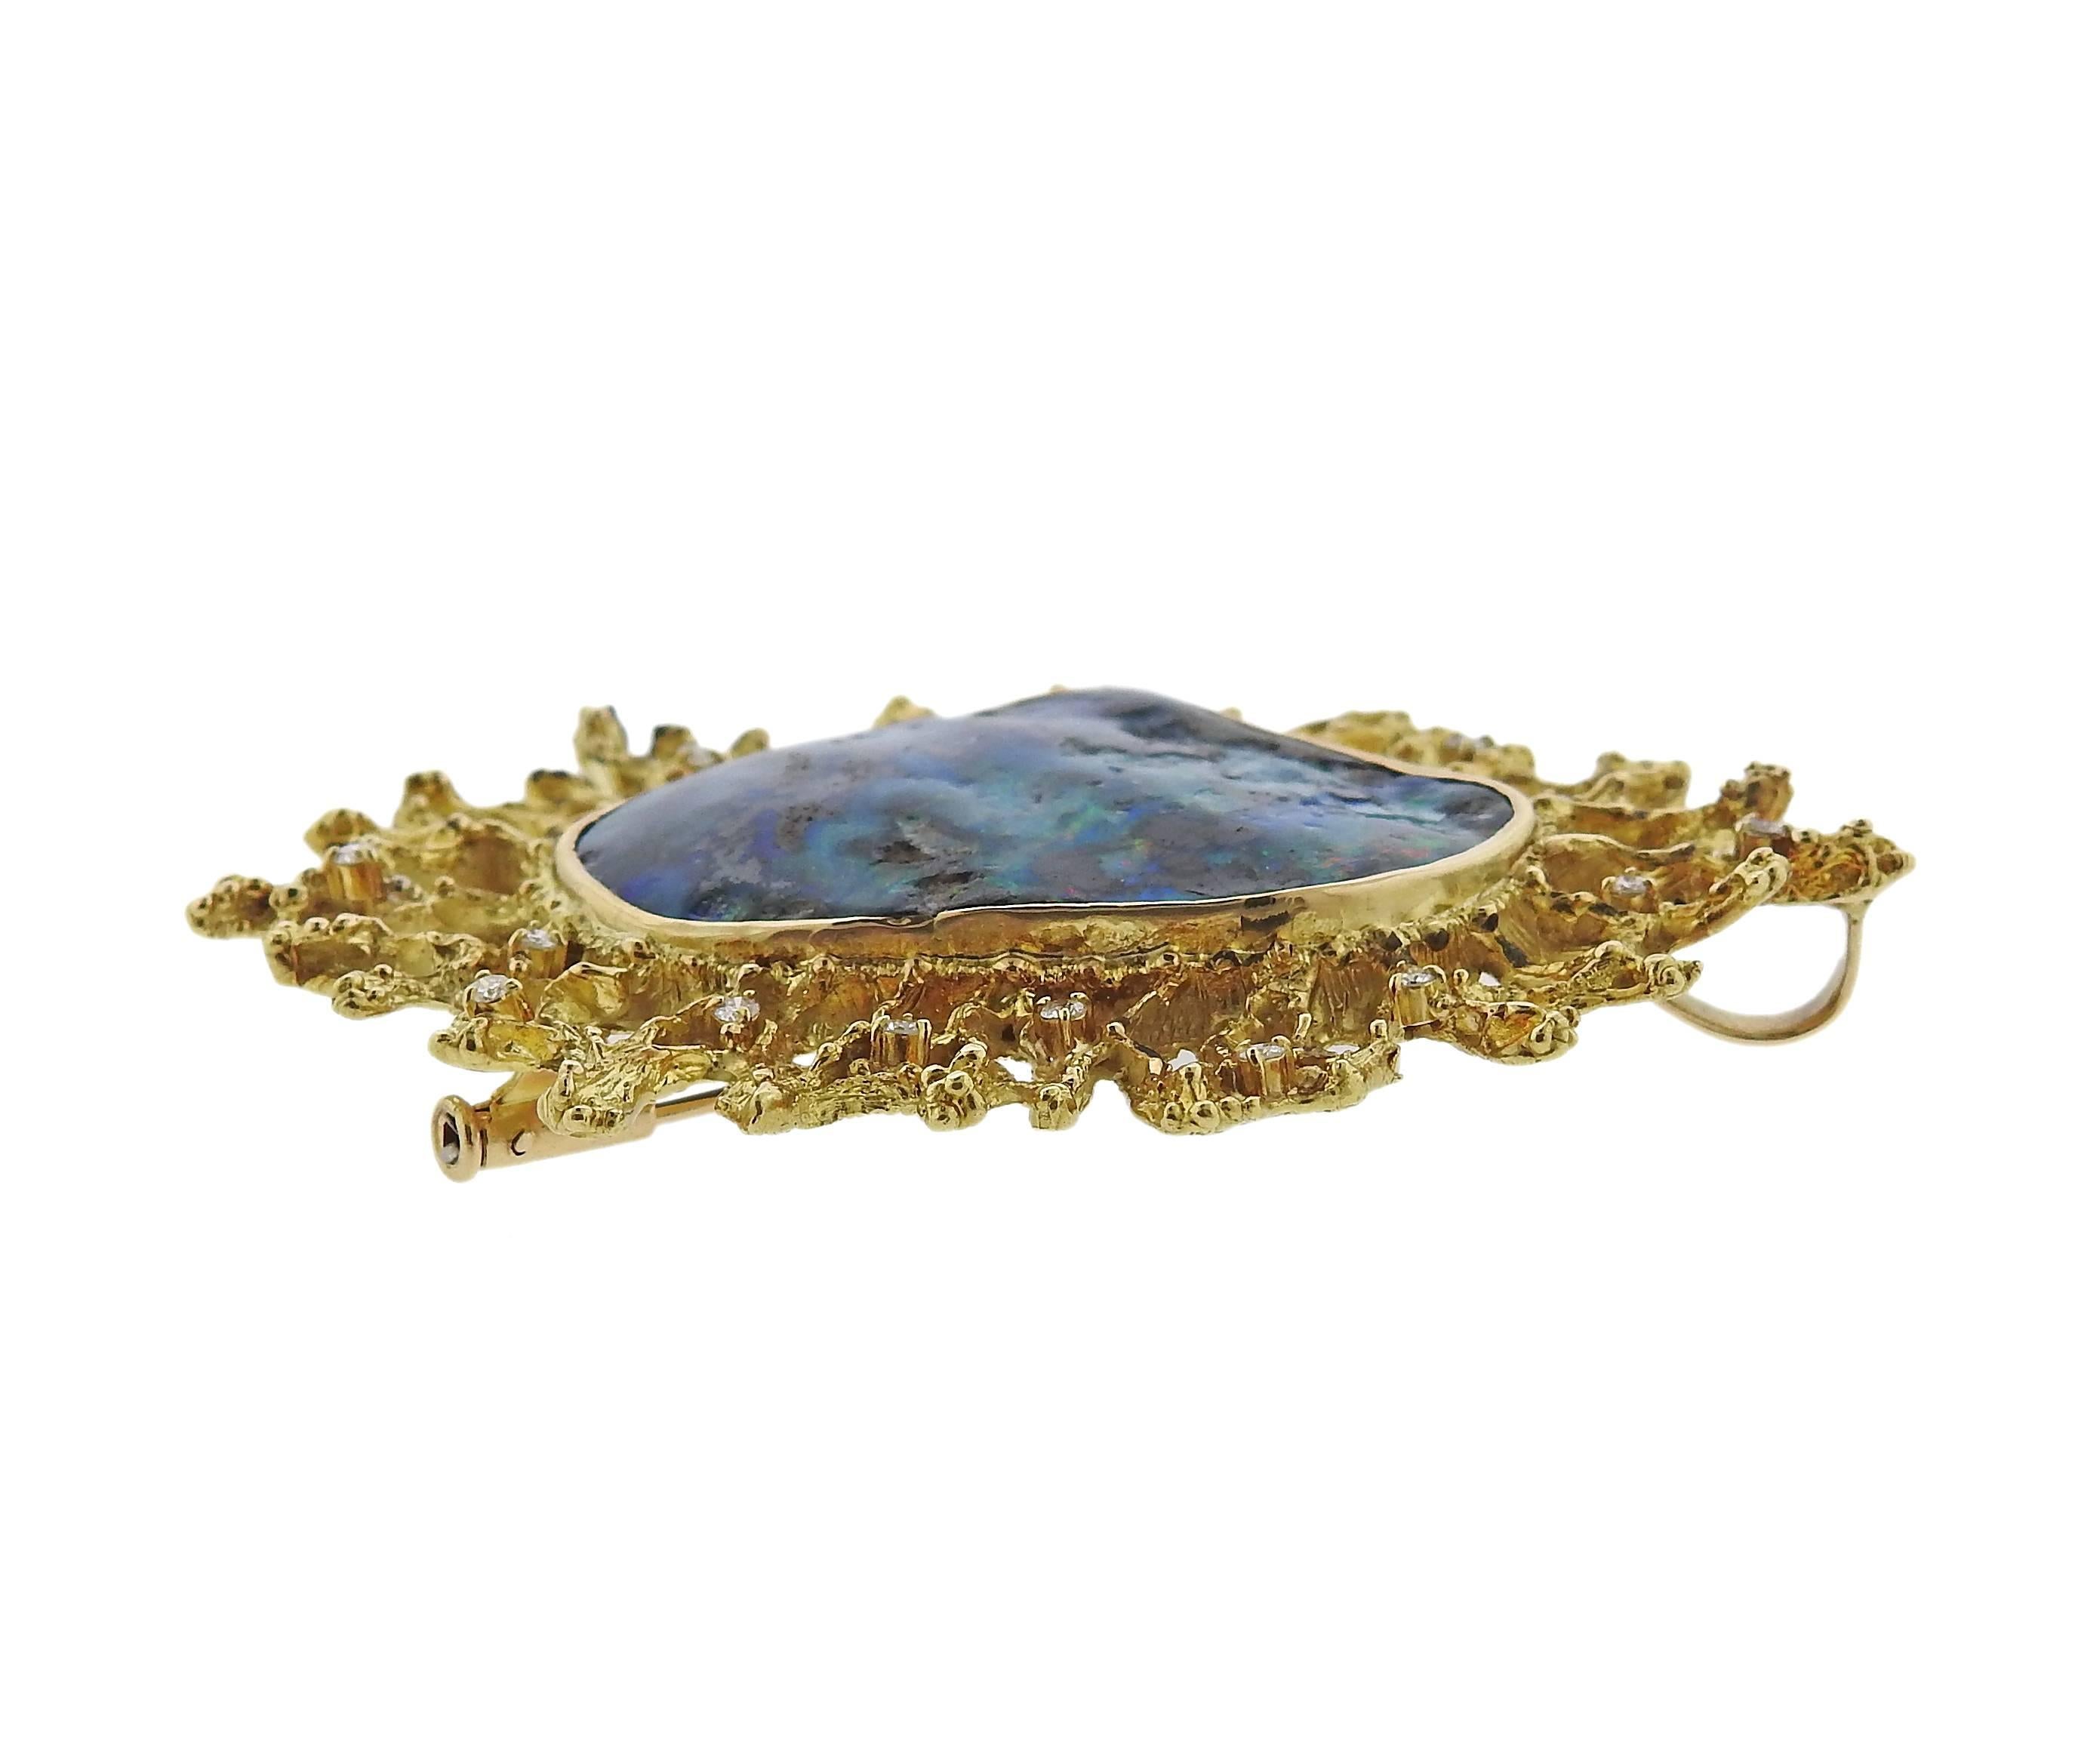 Vintage circa 1970s 18k gold brooch/pendant, set with opal in the center, surrounded with approx. 0.18ctw in diamonds. Brooch measures 61mm x 45mm and weighs 26.4 grams.  